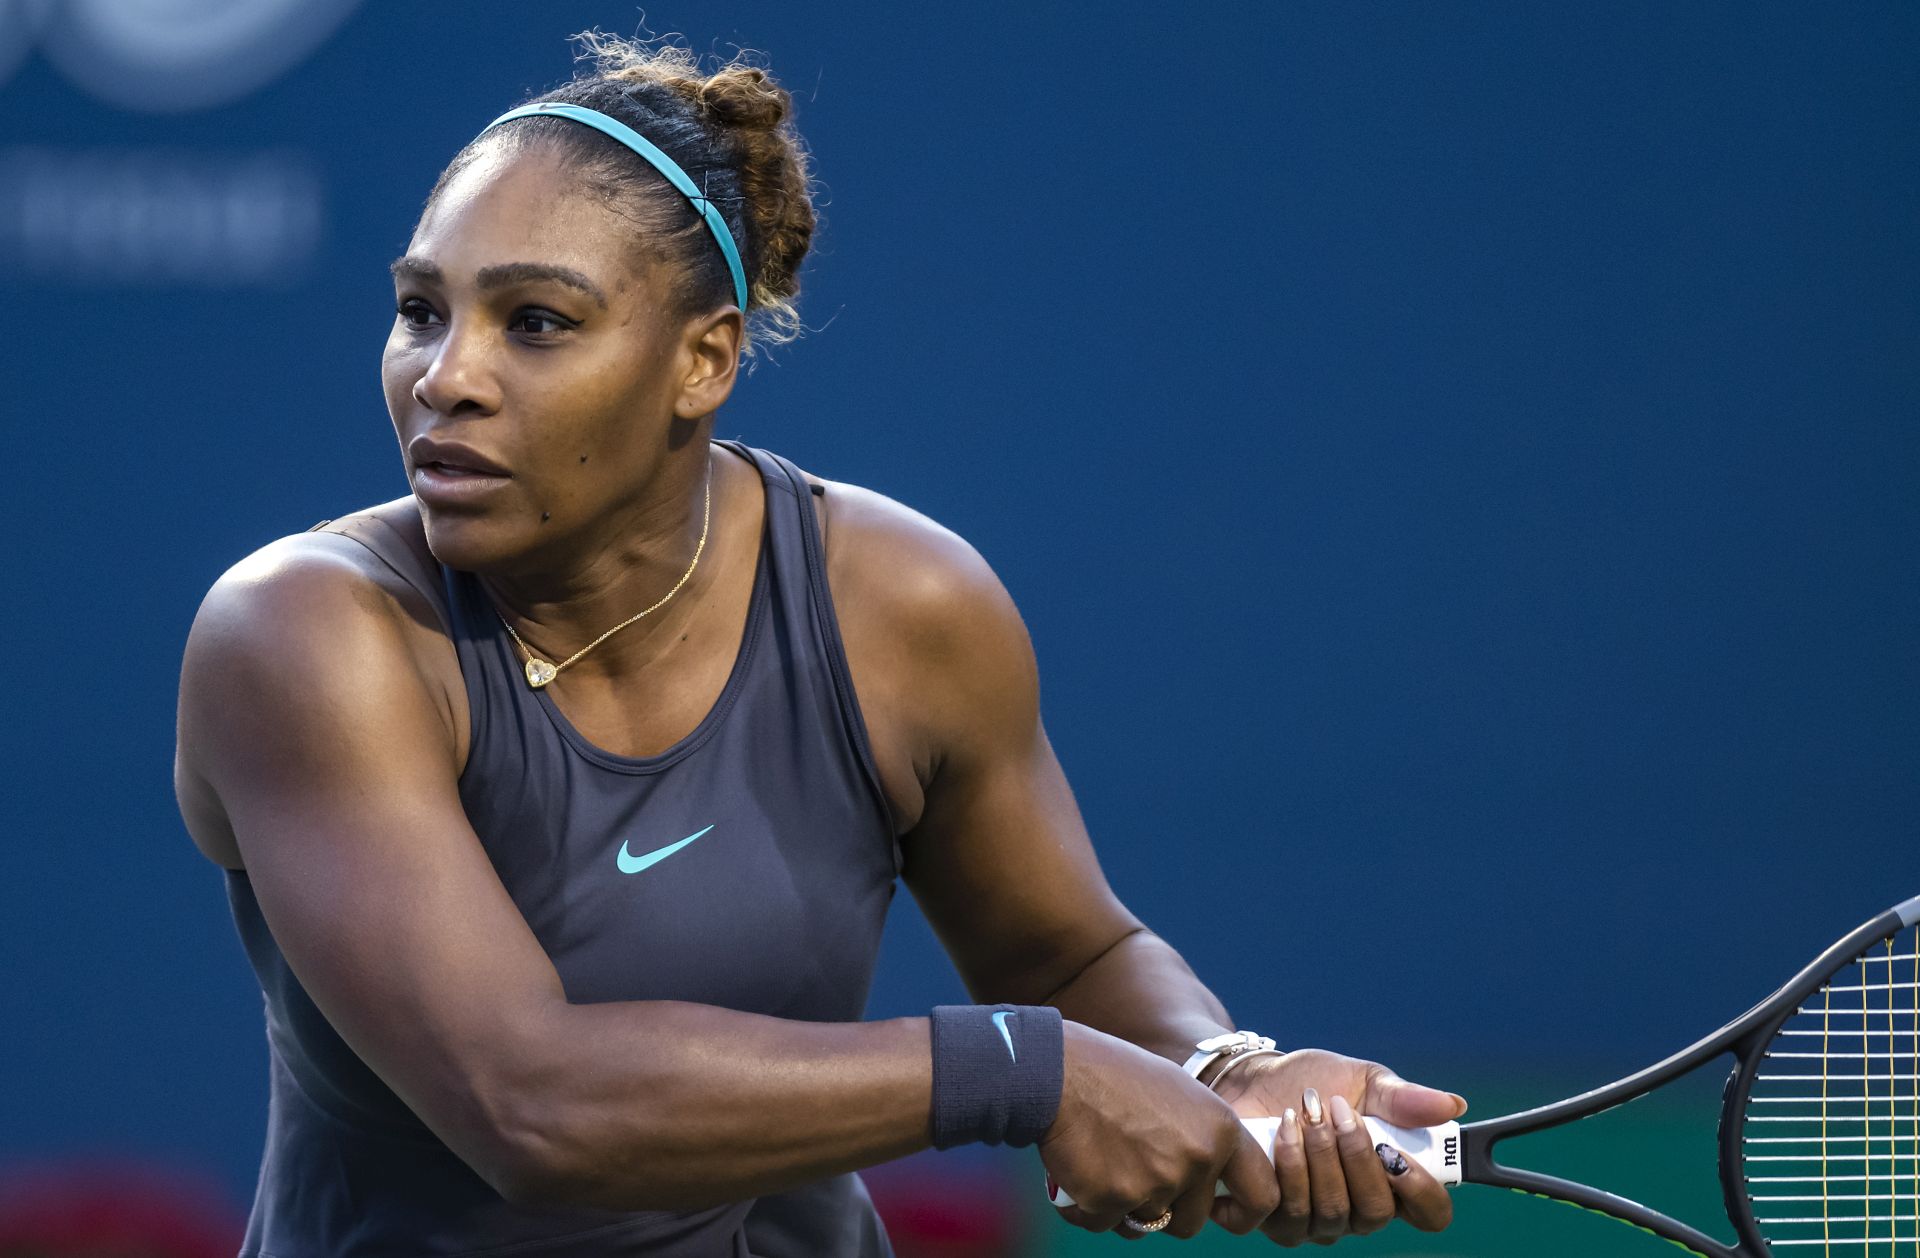 epa07765210 Serena Williams of the USA in action against Naomi Osaka of Japan during their quarterfinals match at the Rogers Cup tennis tournament in Toronto, Canada, 09 August 2019.  EPA/WARREN TODA